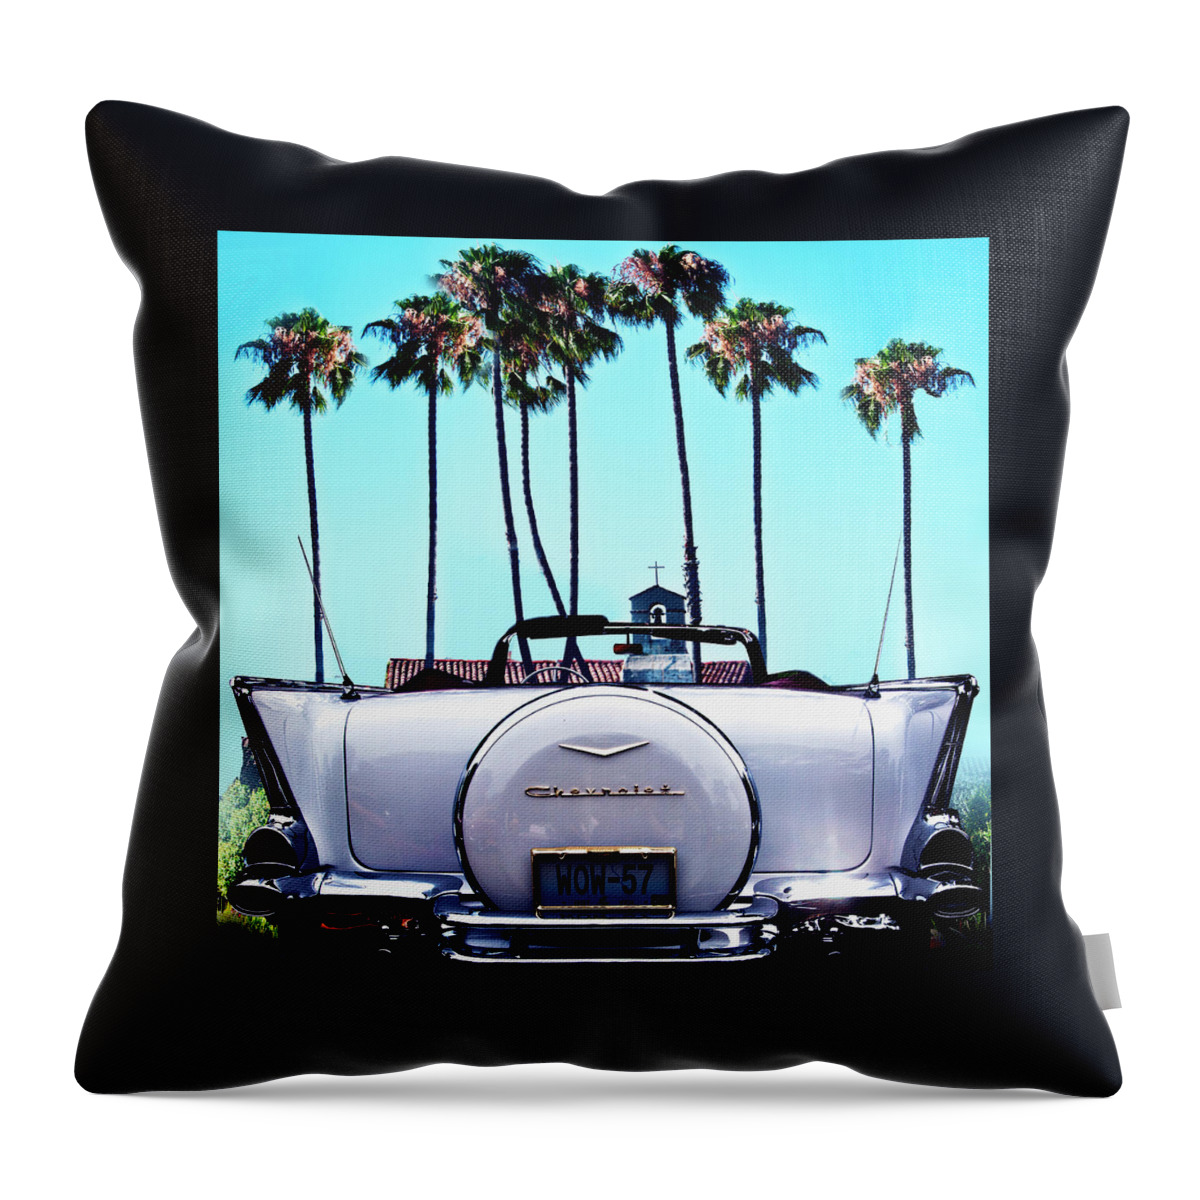 Chevrolet Belair Throw Pillow featuring the photograph Vintage Chevrolet Convertible by Larry Butterworth